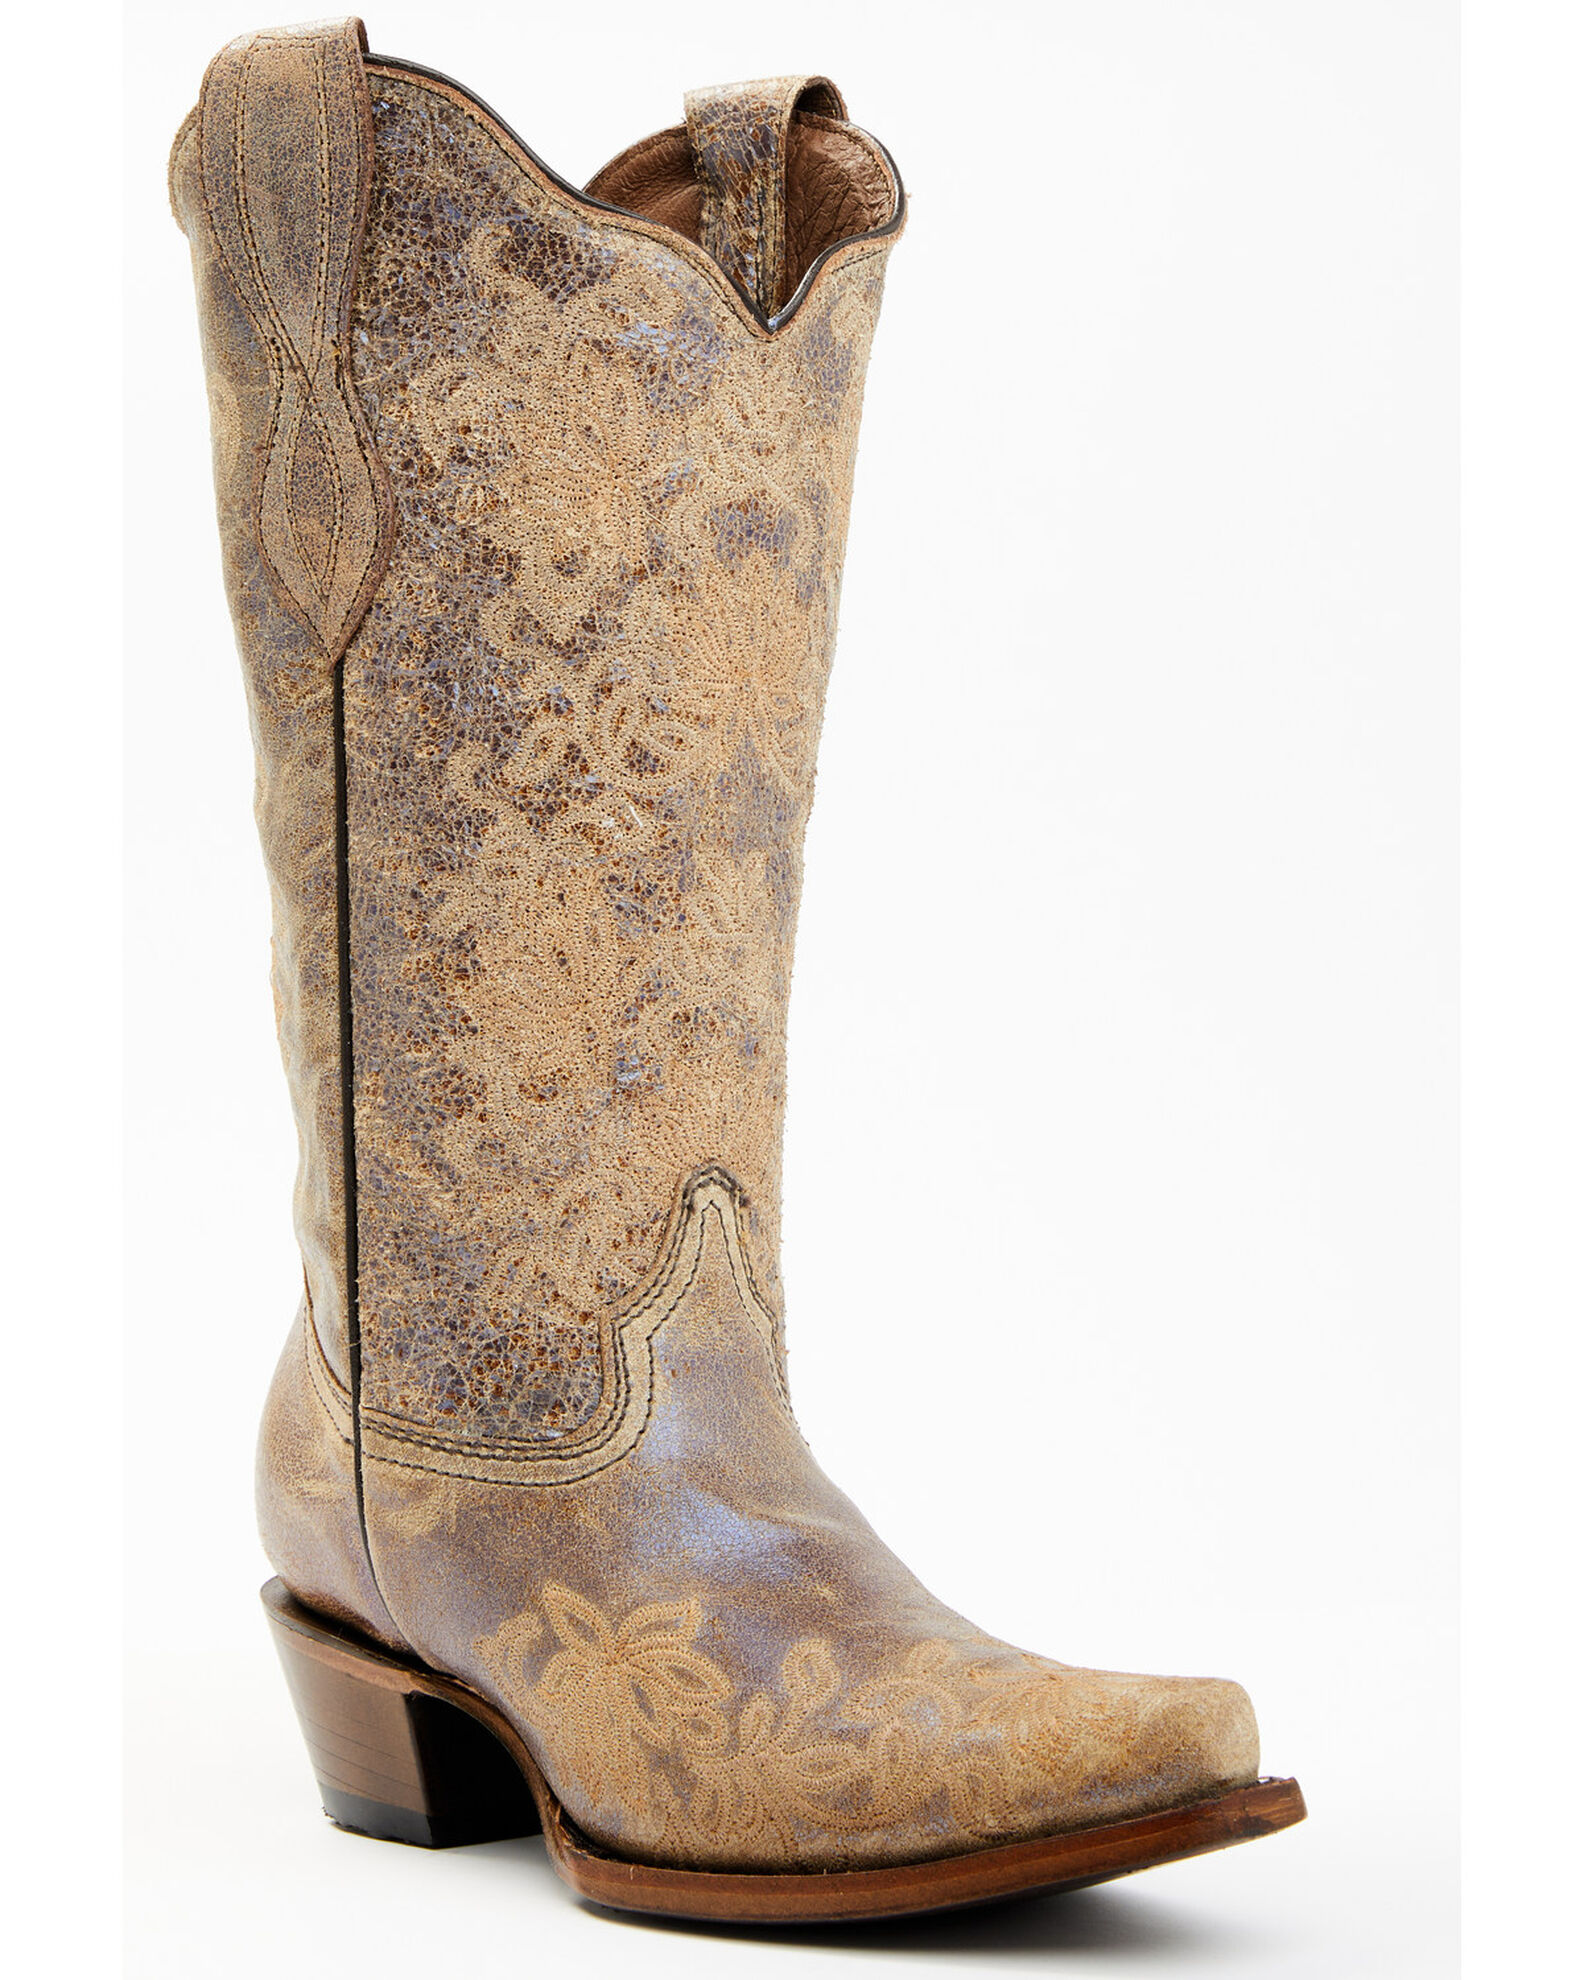 Circle G Women's Brown Floral Embroidery Western Boots - Snip Toe